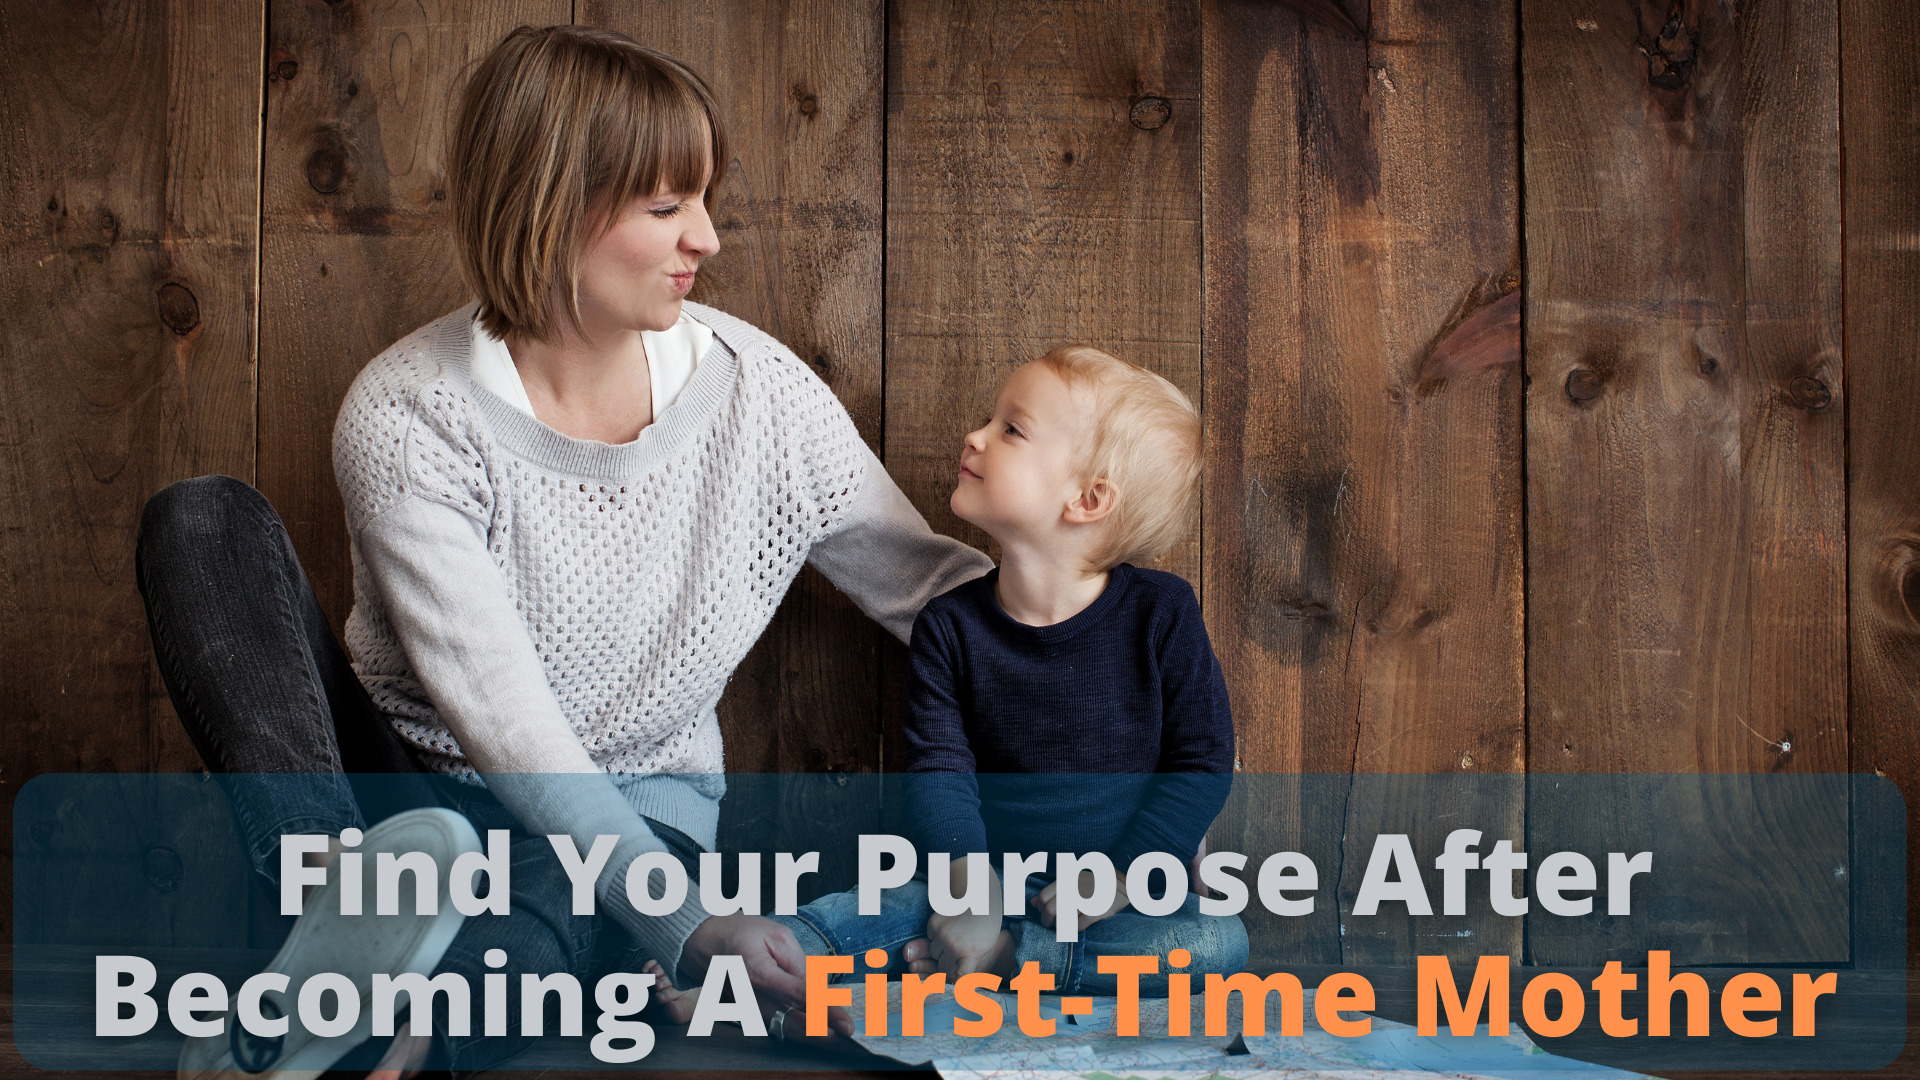 The Best 6 Ways to Find Your Purpose After Becoming A First-Time Mother